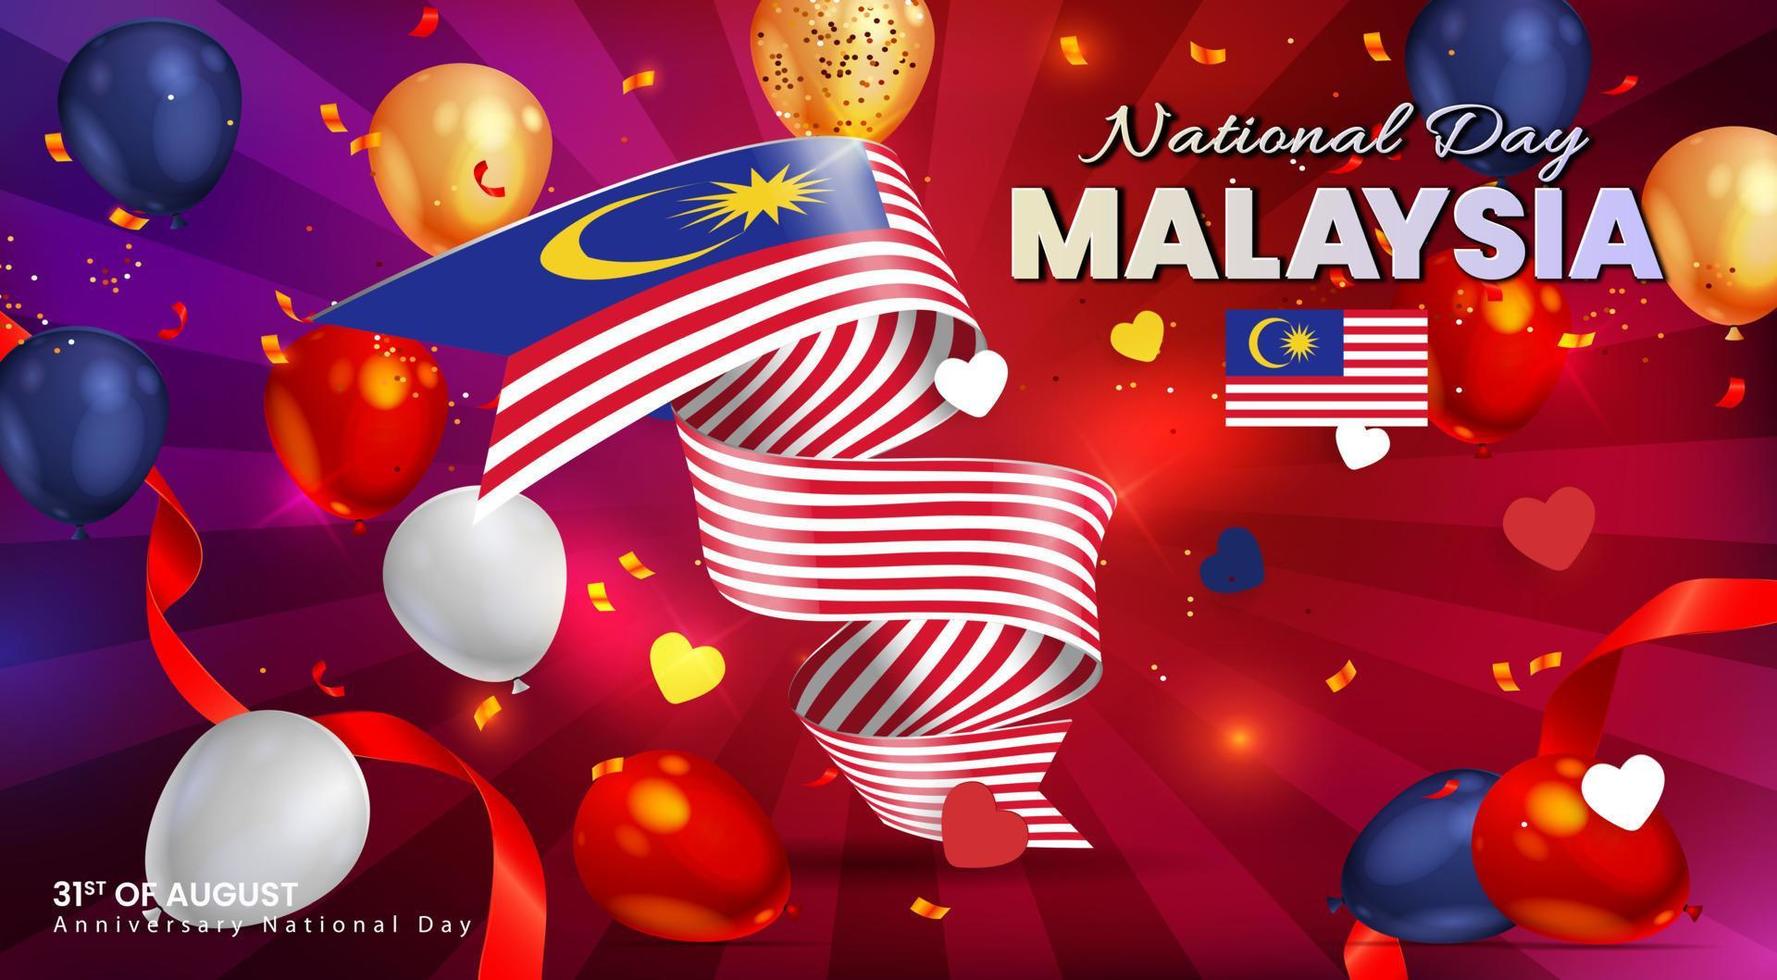 Happy anniversary National Day of Malaysia. design illustration for Banners and Posters vector